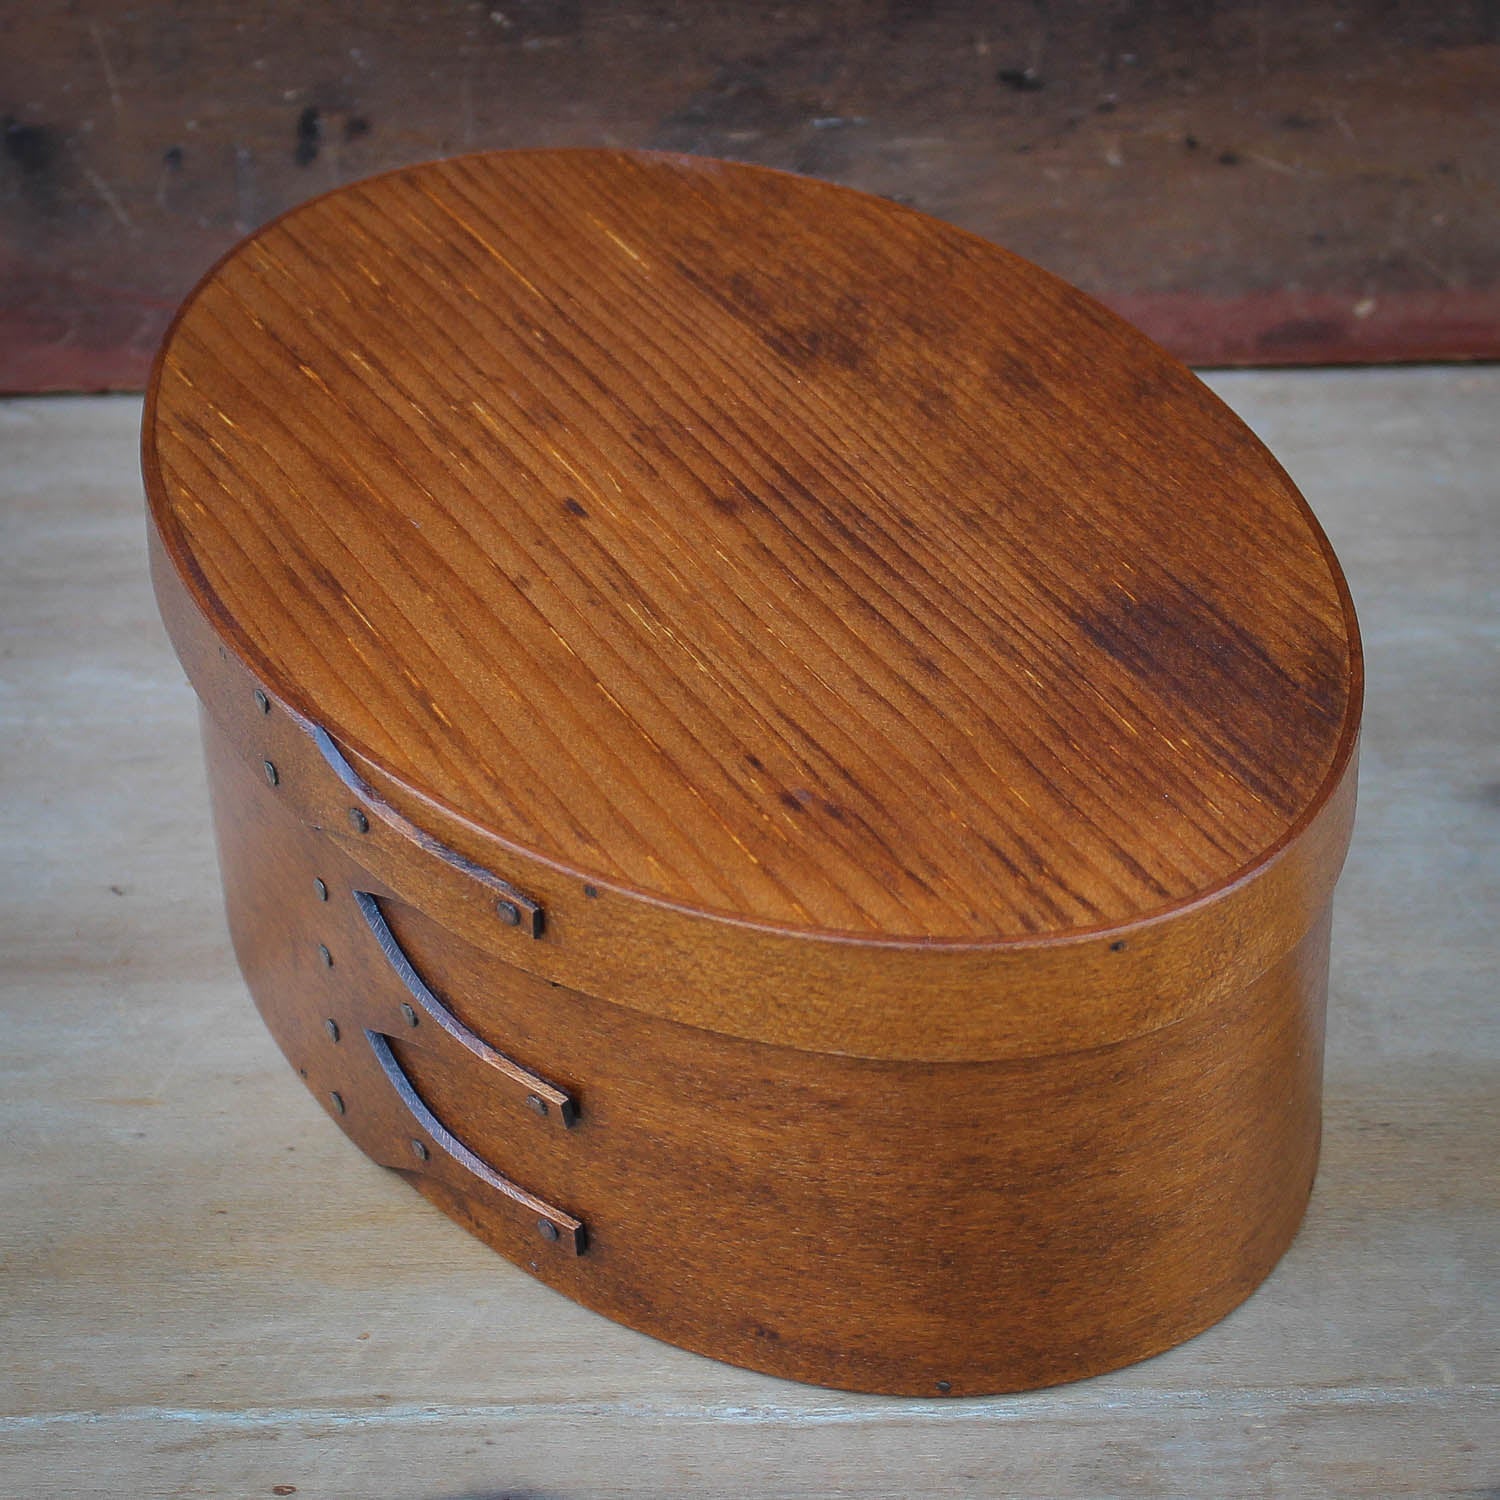 Shaker Oval Box, Size #4, LeHays Shaker Boxes, Handcrafted in Maine.  Antiqued Natural Finish, Side View